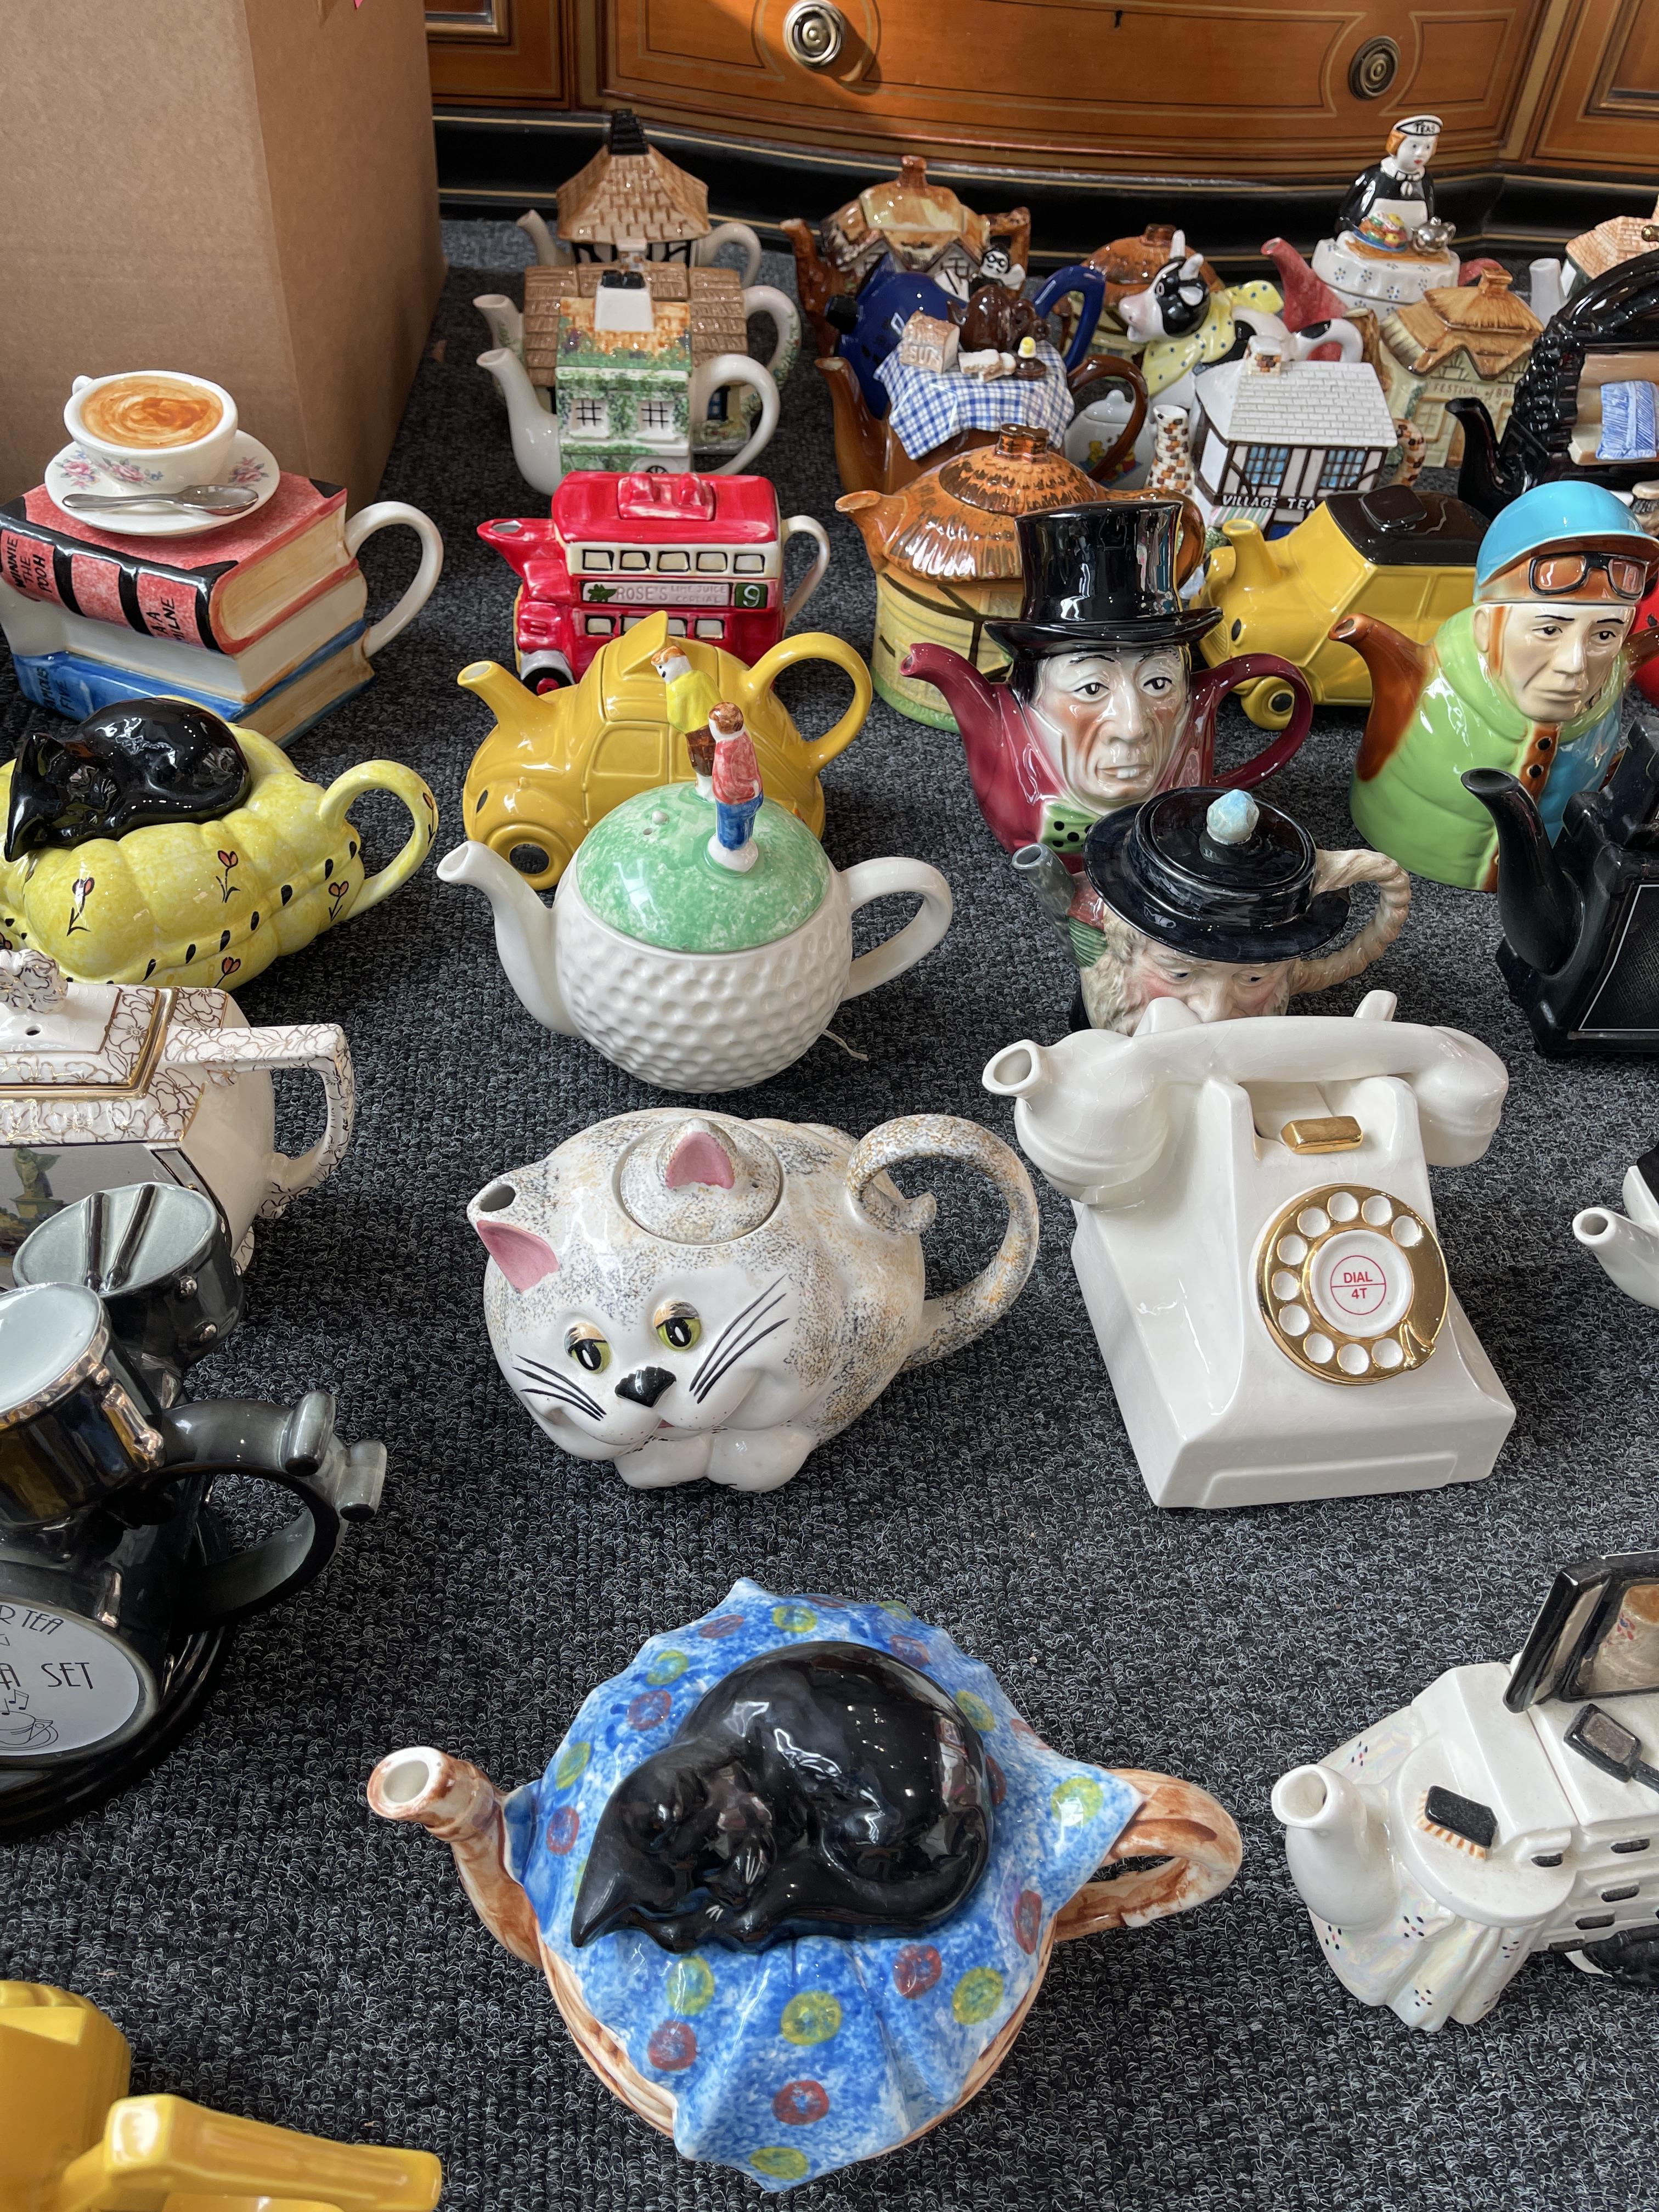 Collection of Ceramic Tea Pots - Image 27 of 44